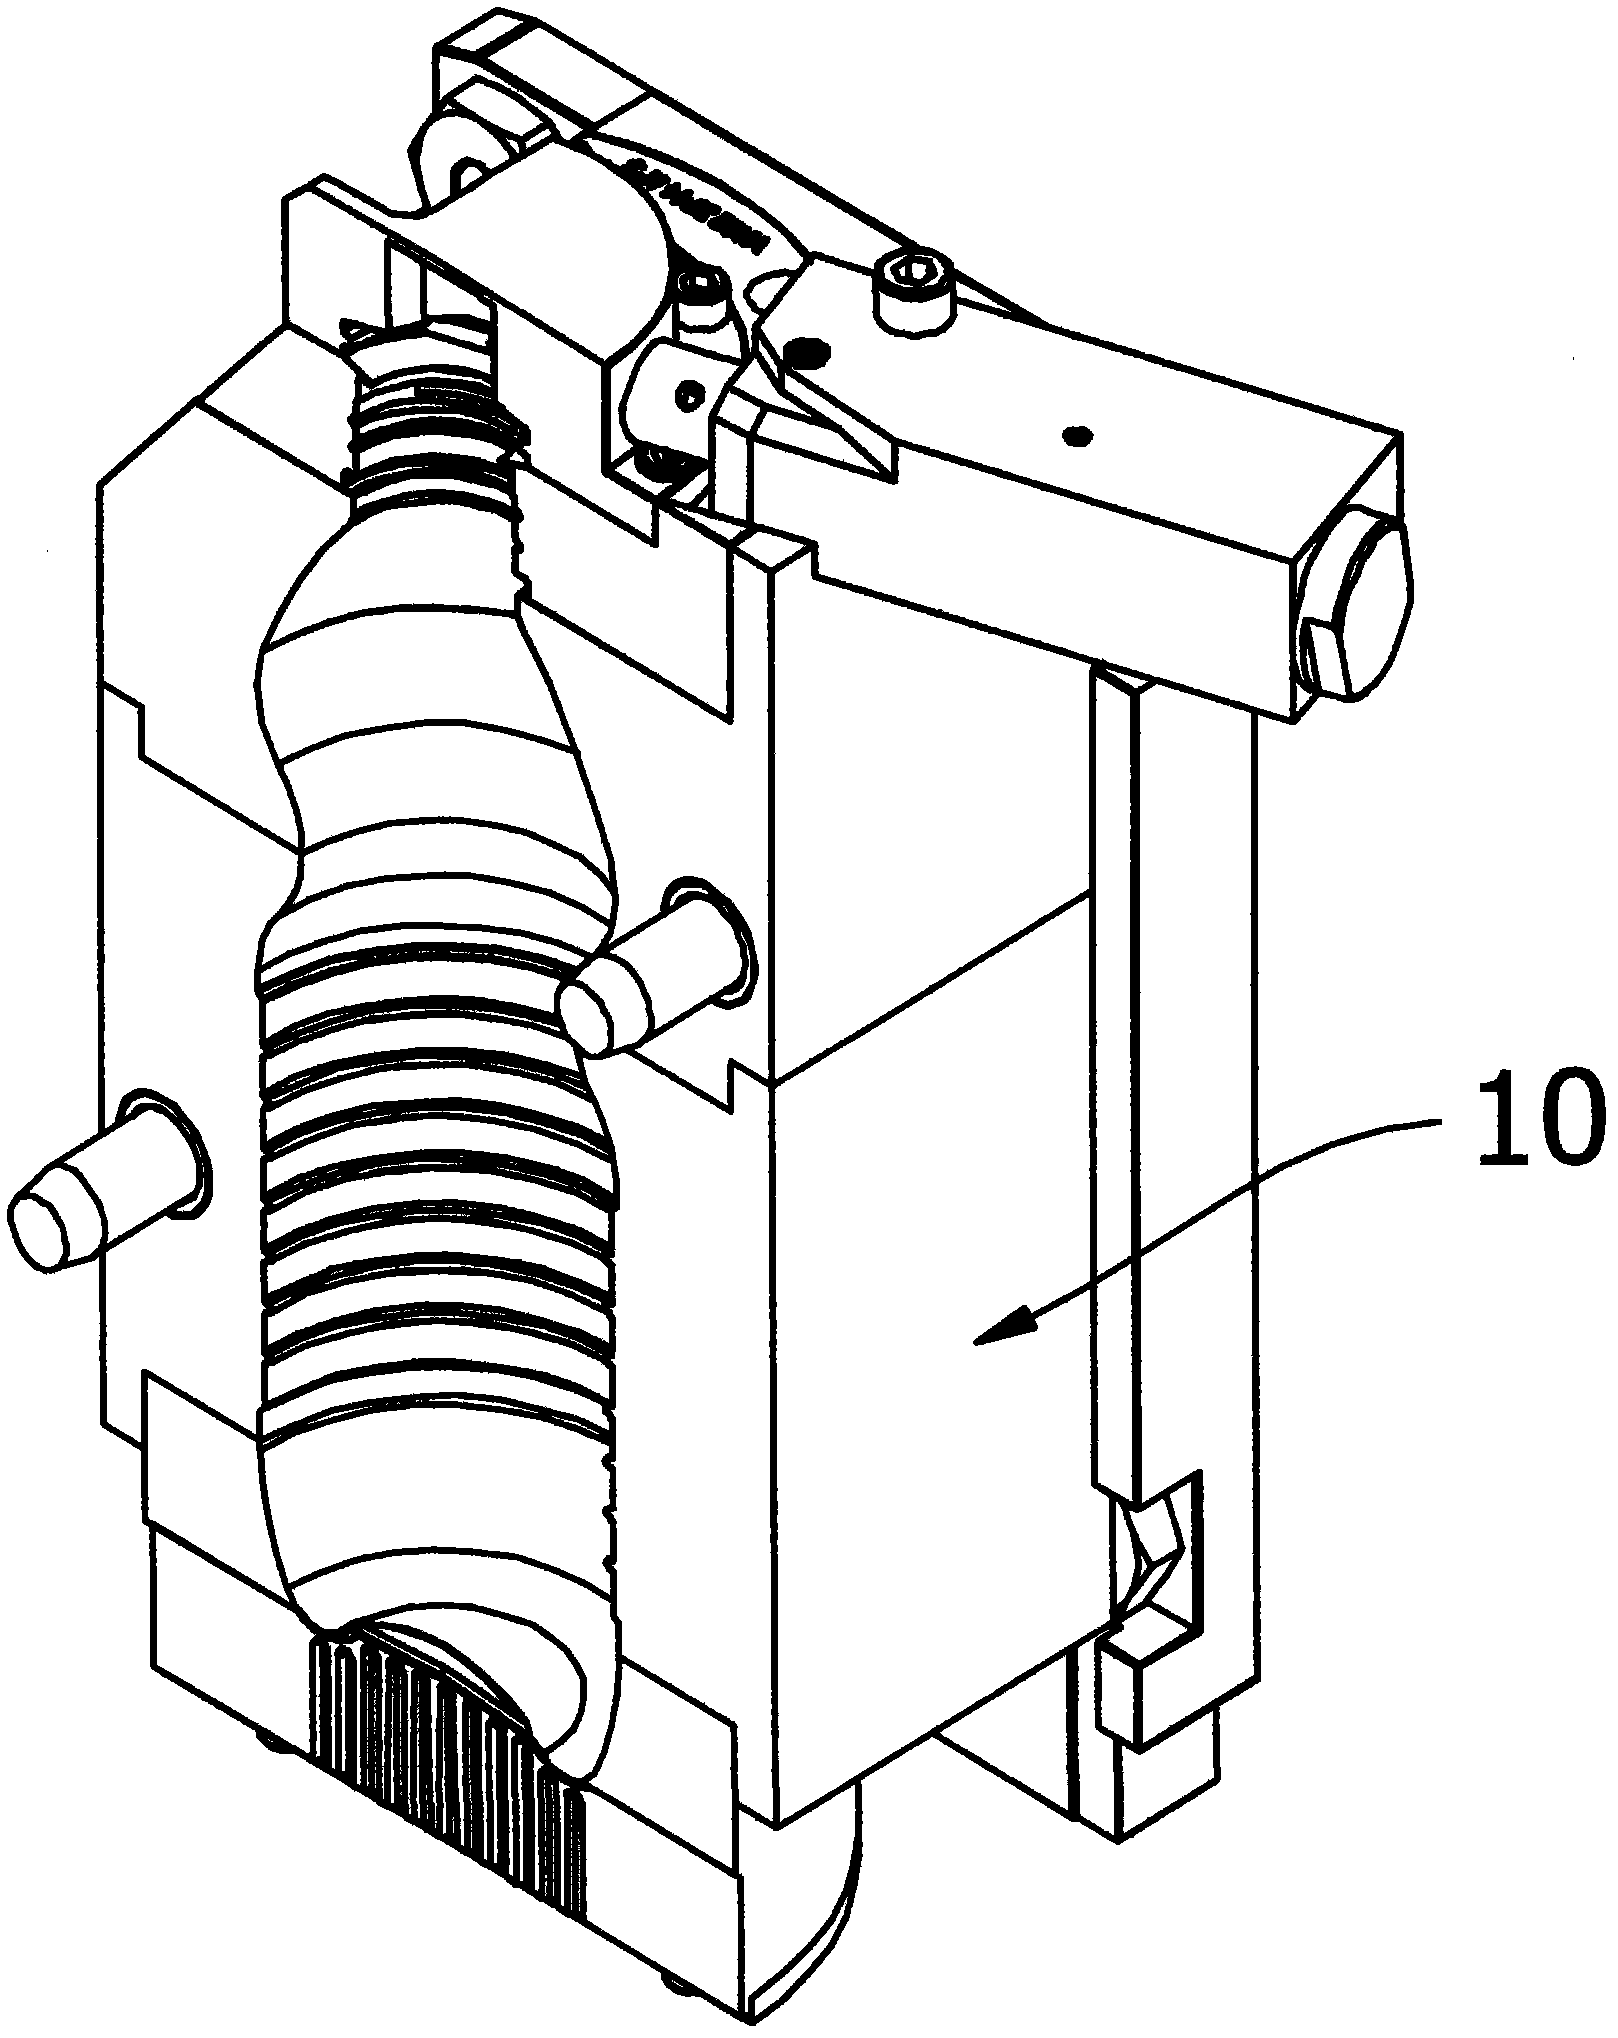 Mould structure of horizontal rotary bottle blowing machine